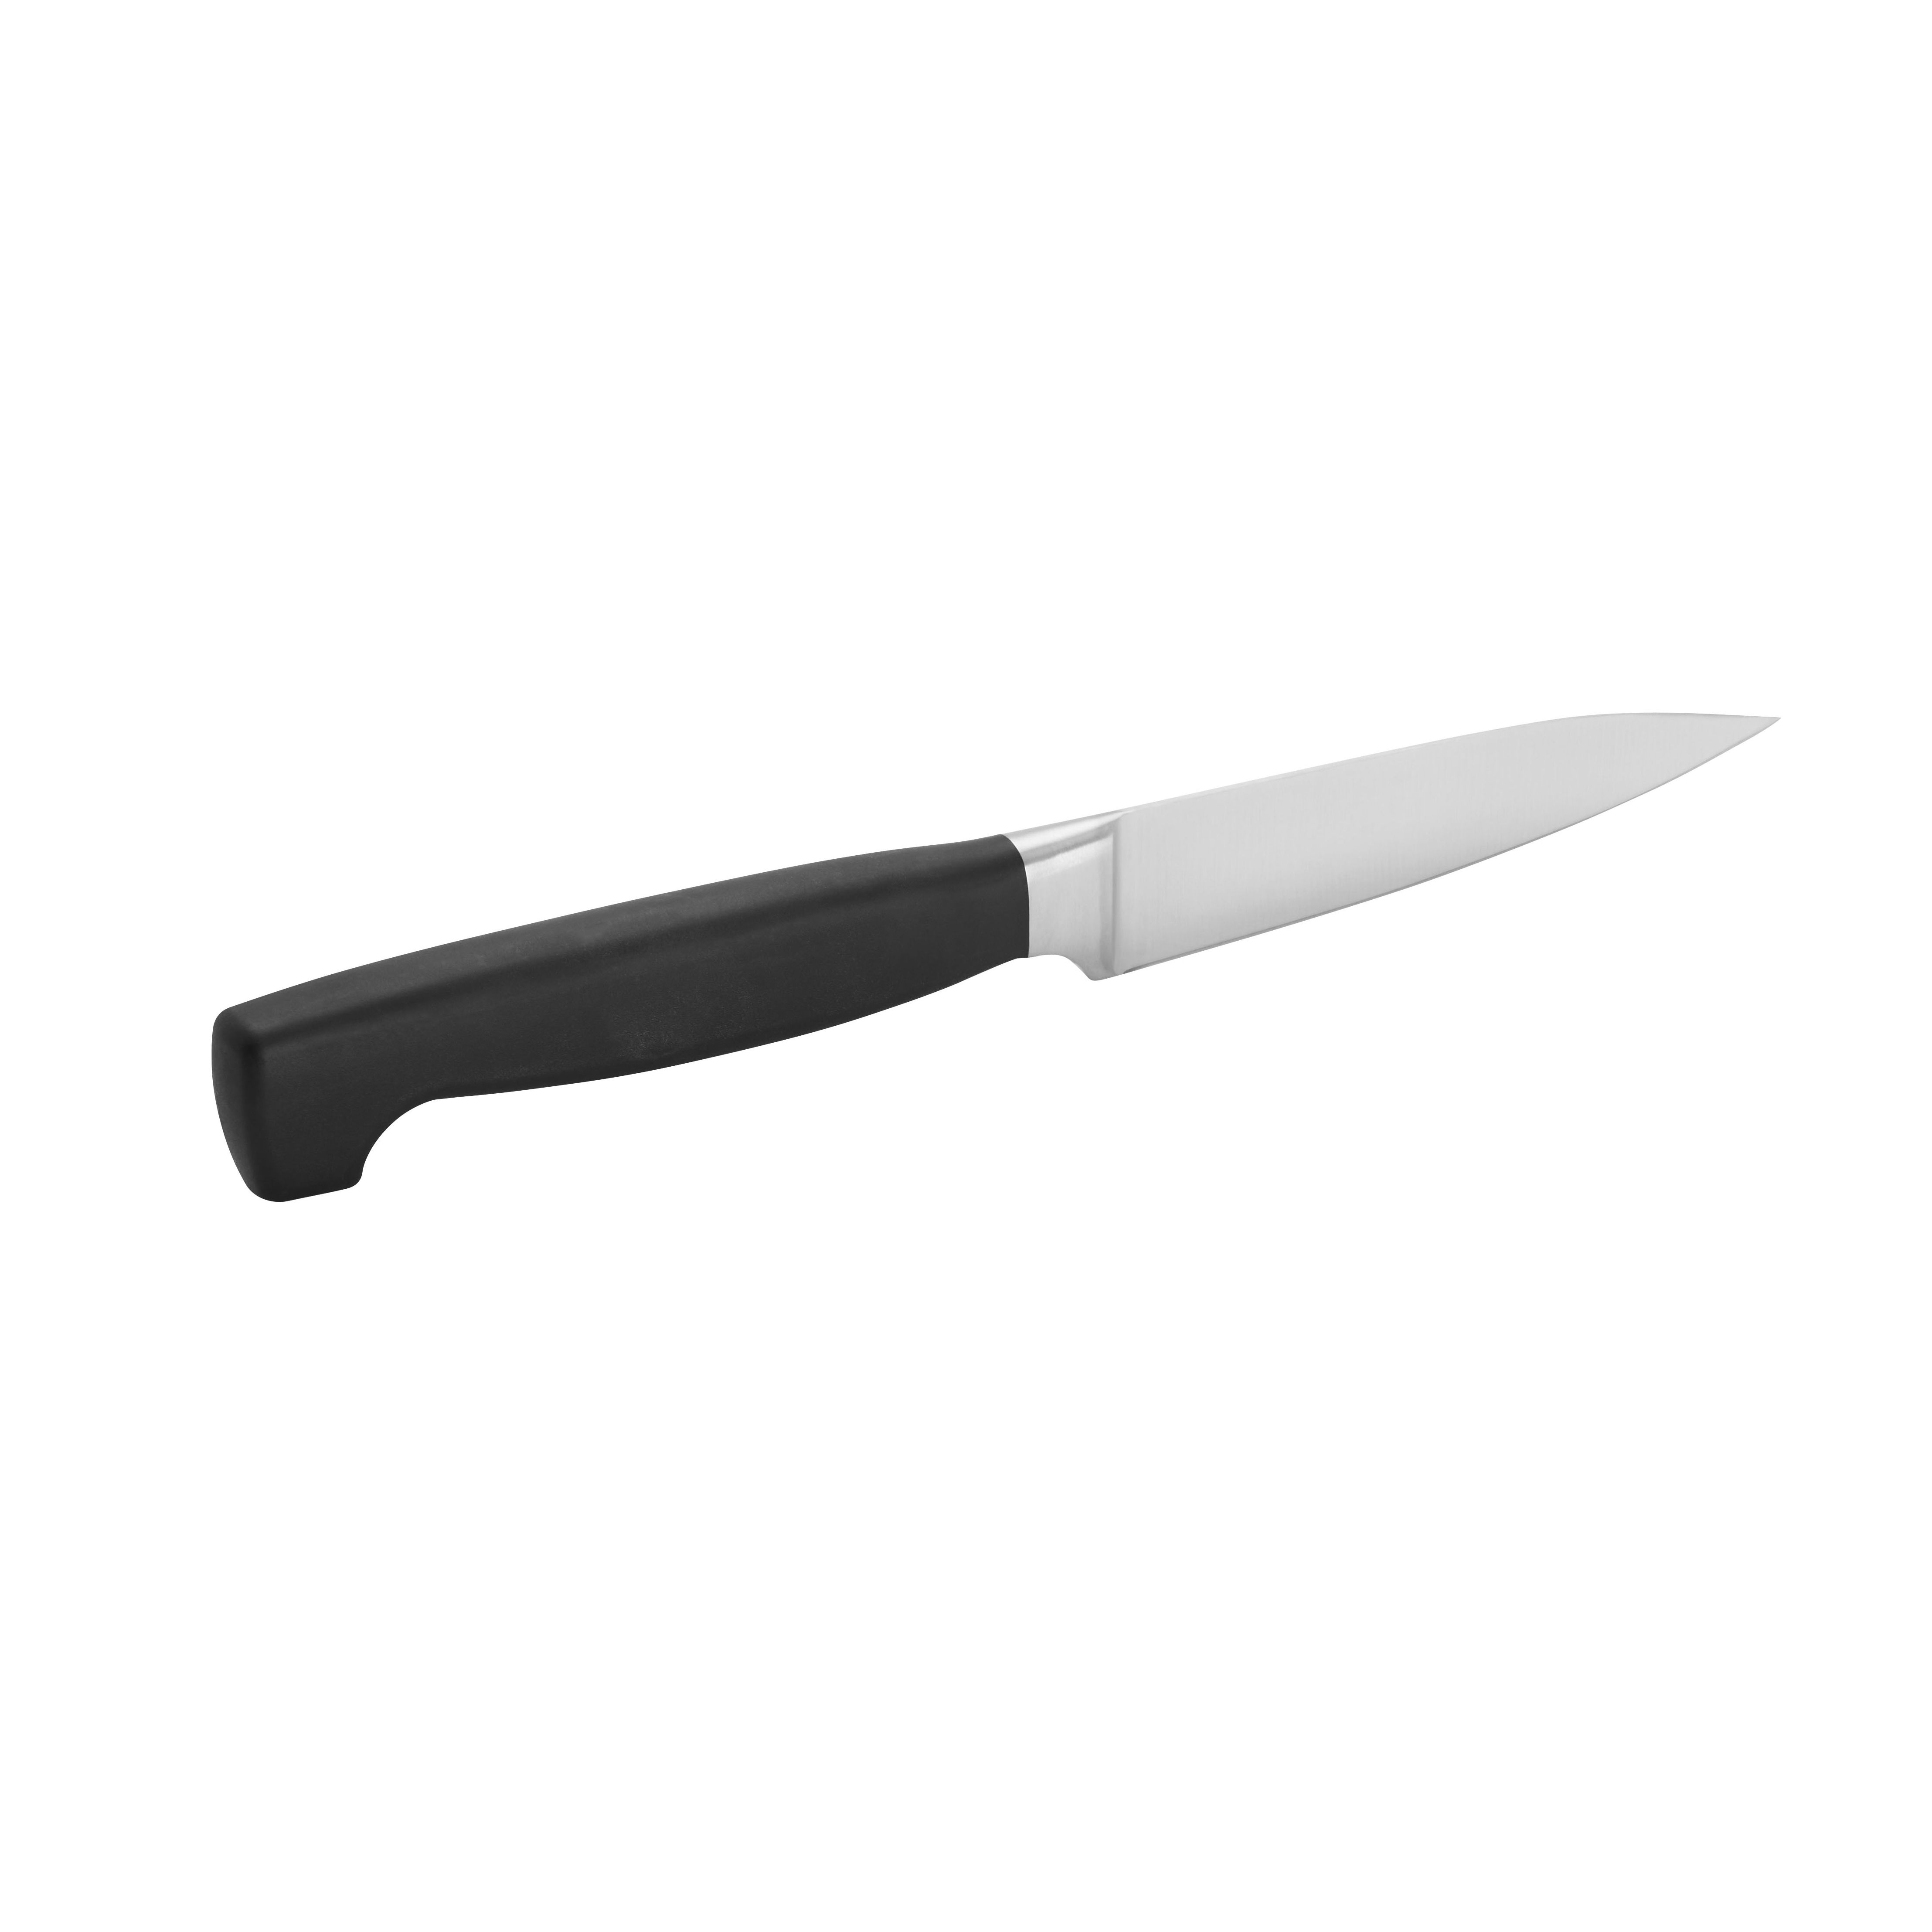 Zwilling J.A. Henckels Four Star 4 inch Paring Knife, 31070-100